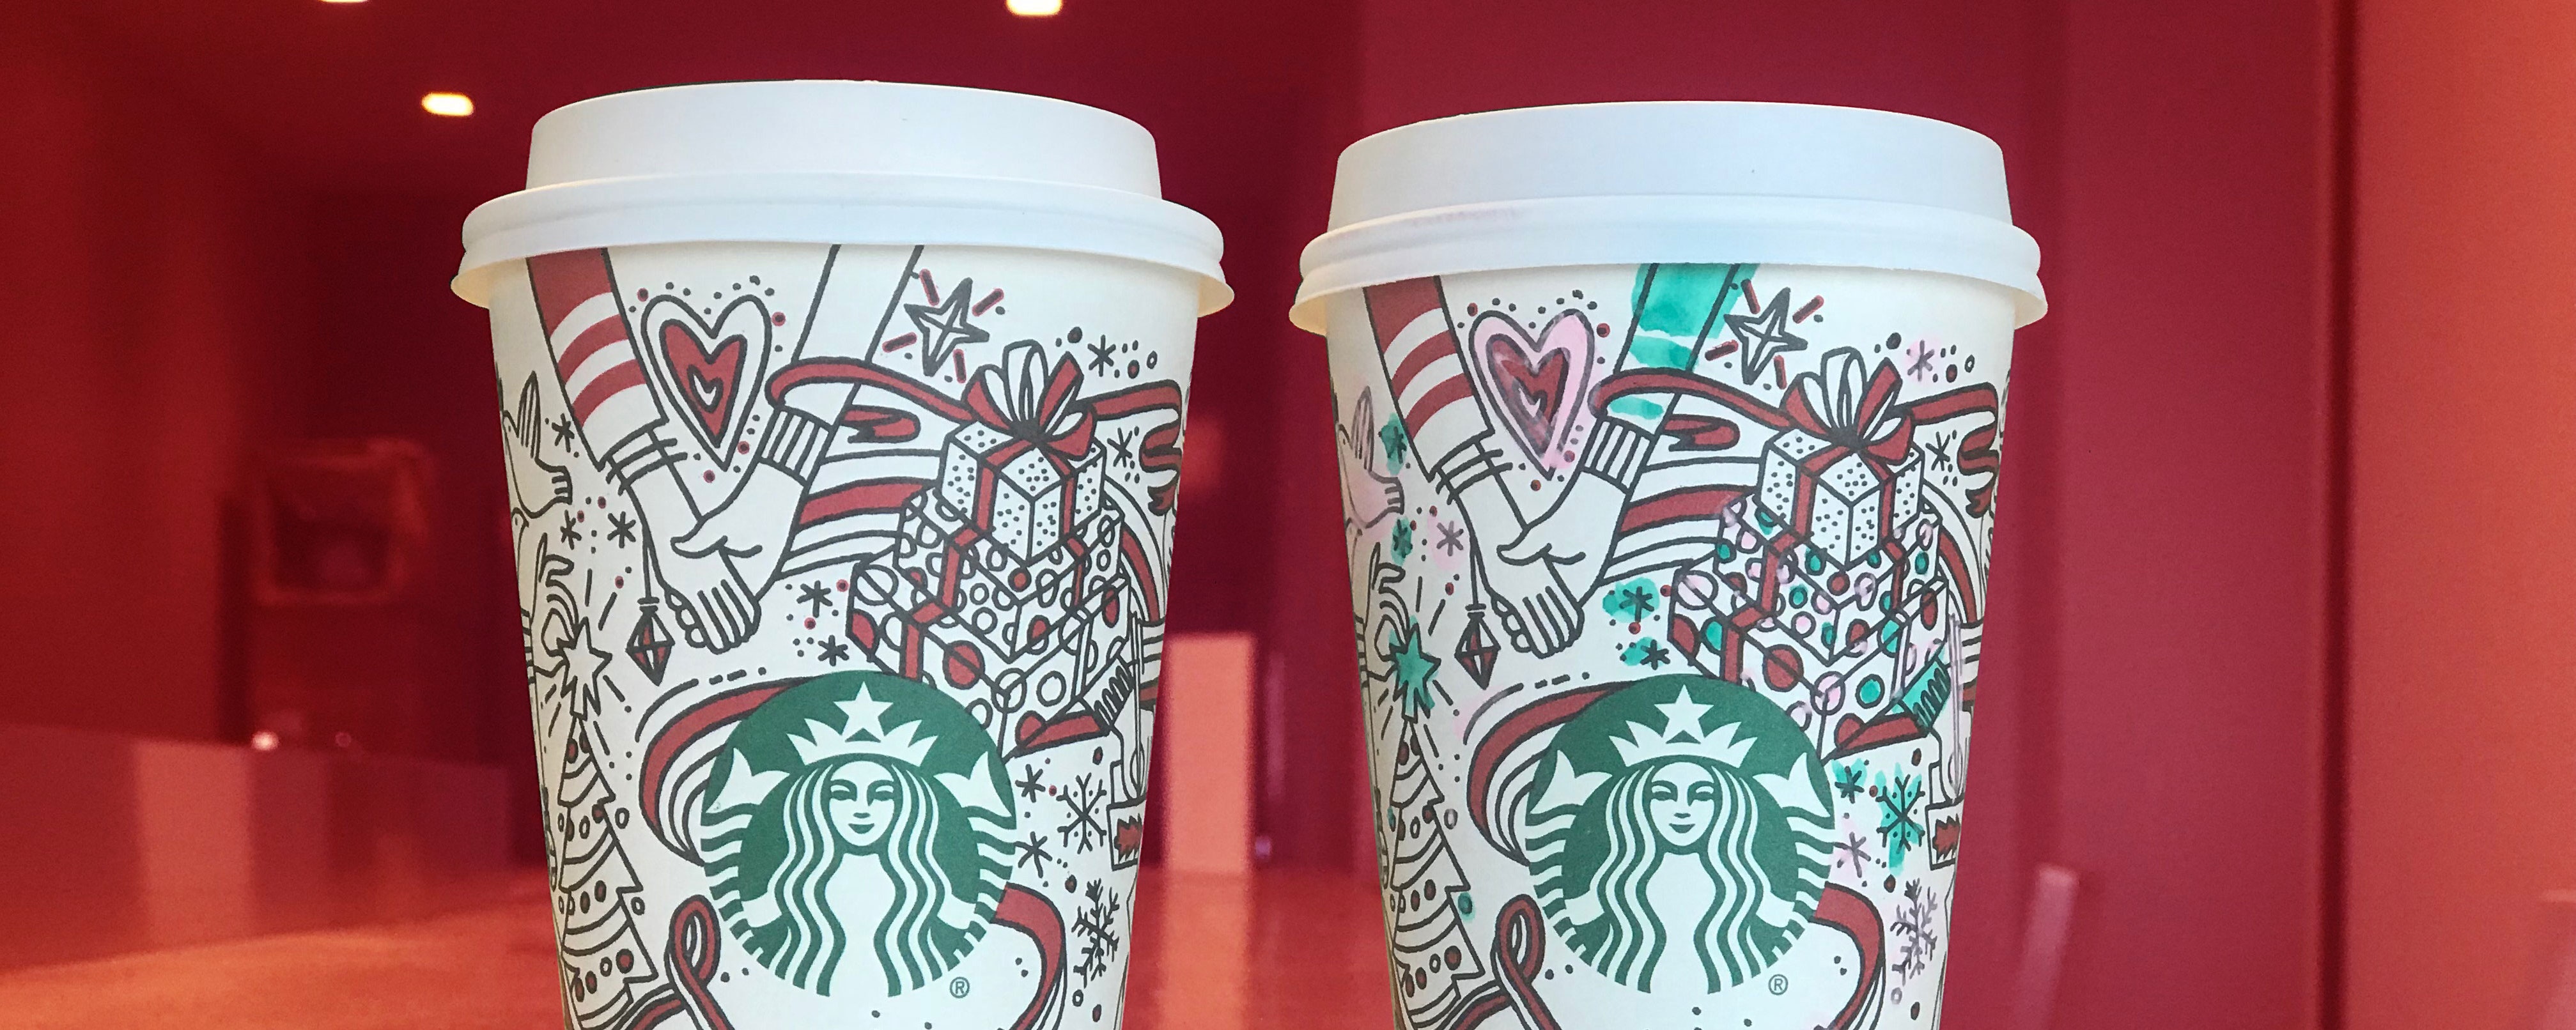 Starbucks Holiday Cups Face Controversy For Being LGBTQ Friendly